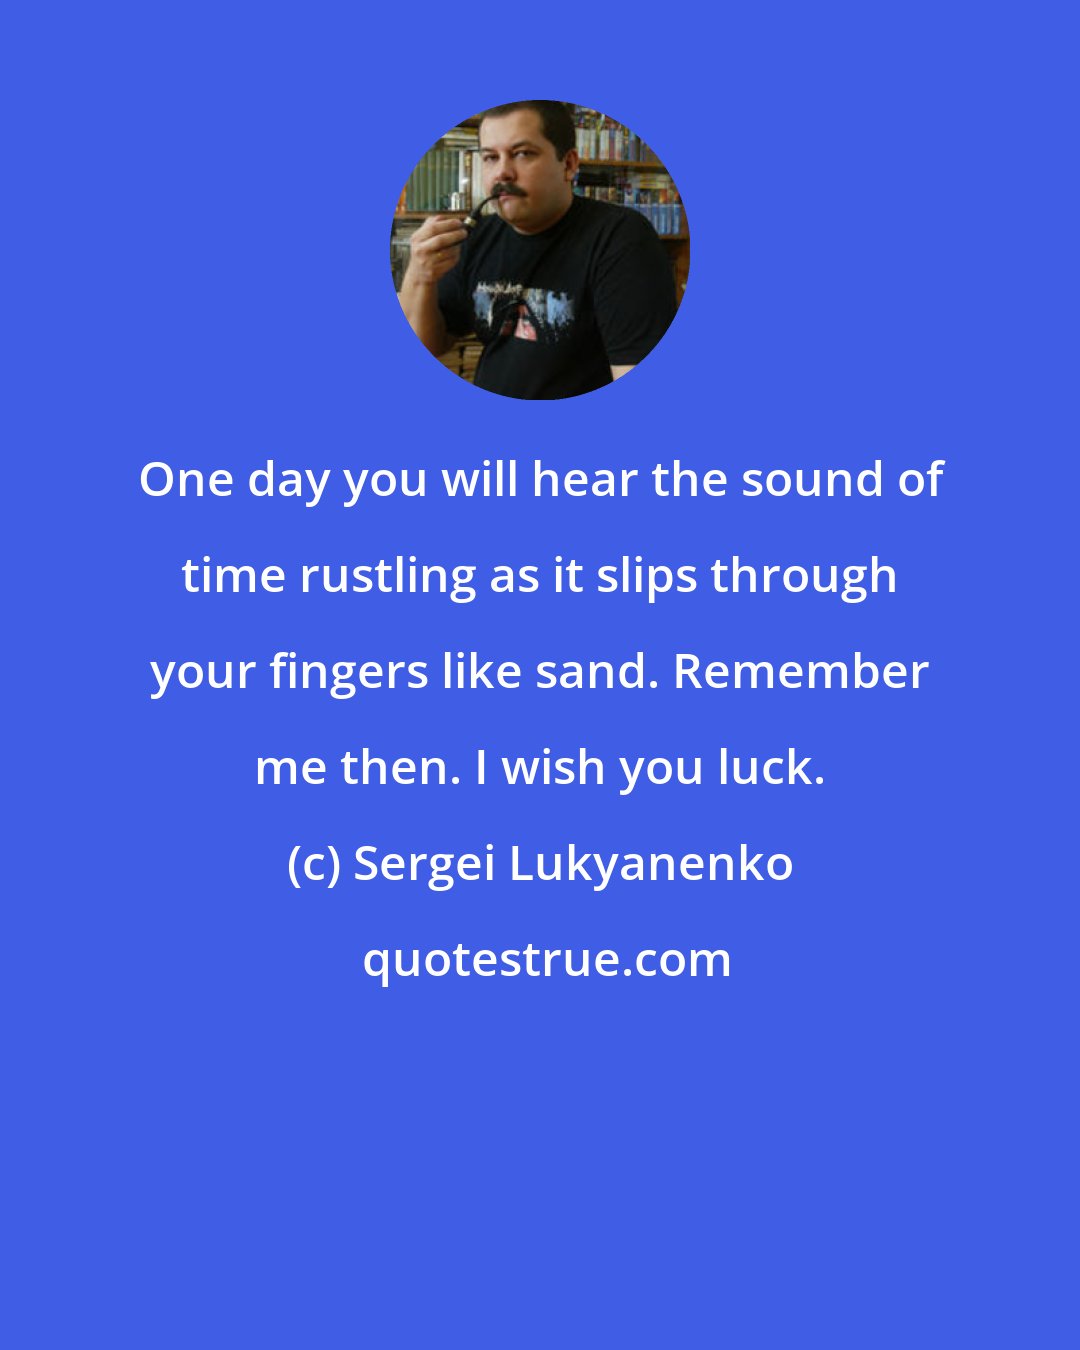 Sergei Lukyanenko: One day you will hear the sound of time rustling as it slips through your fingers like sand. Remember me then. I wish you luck.